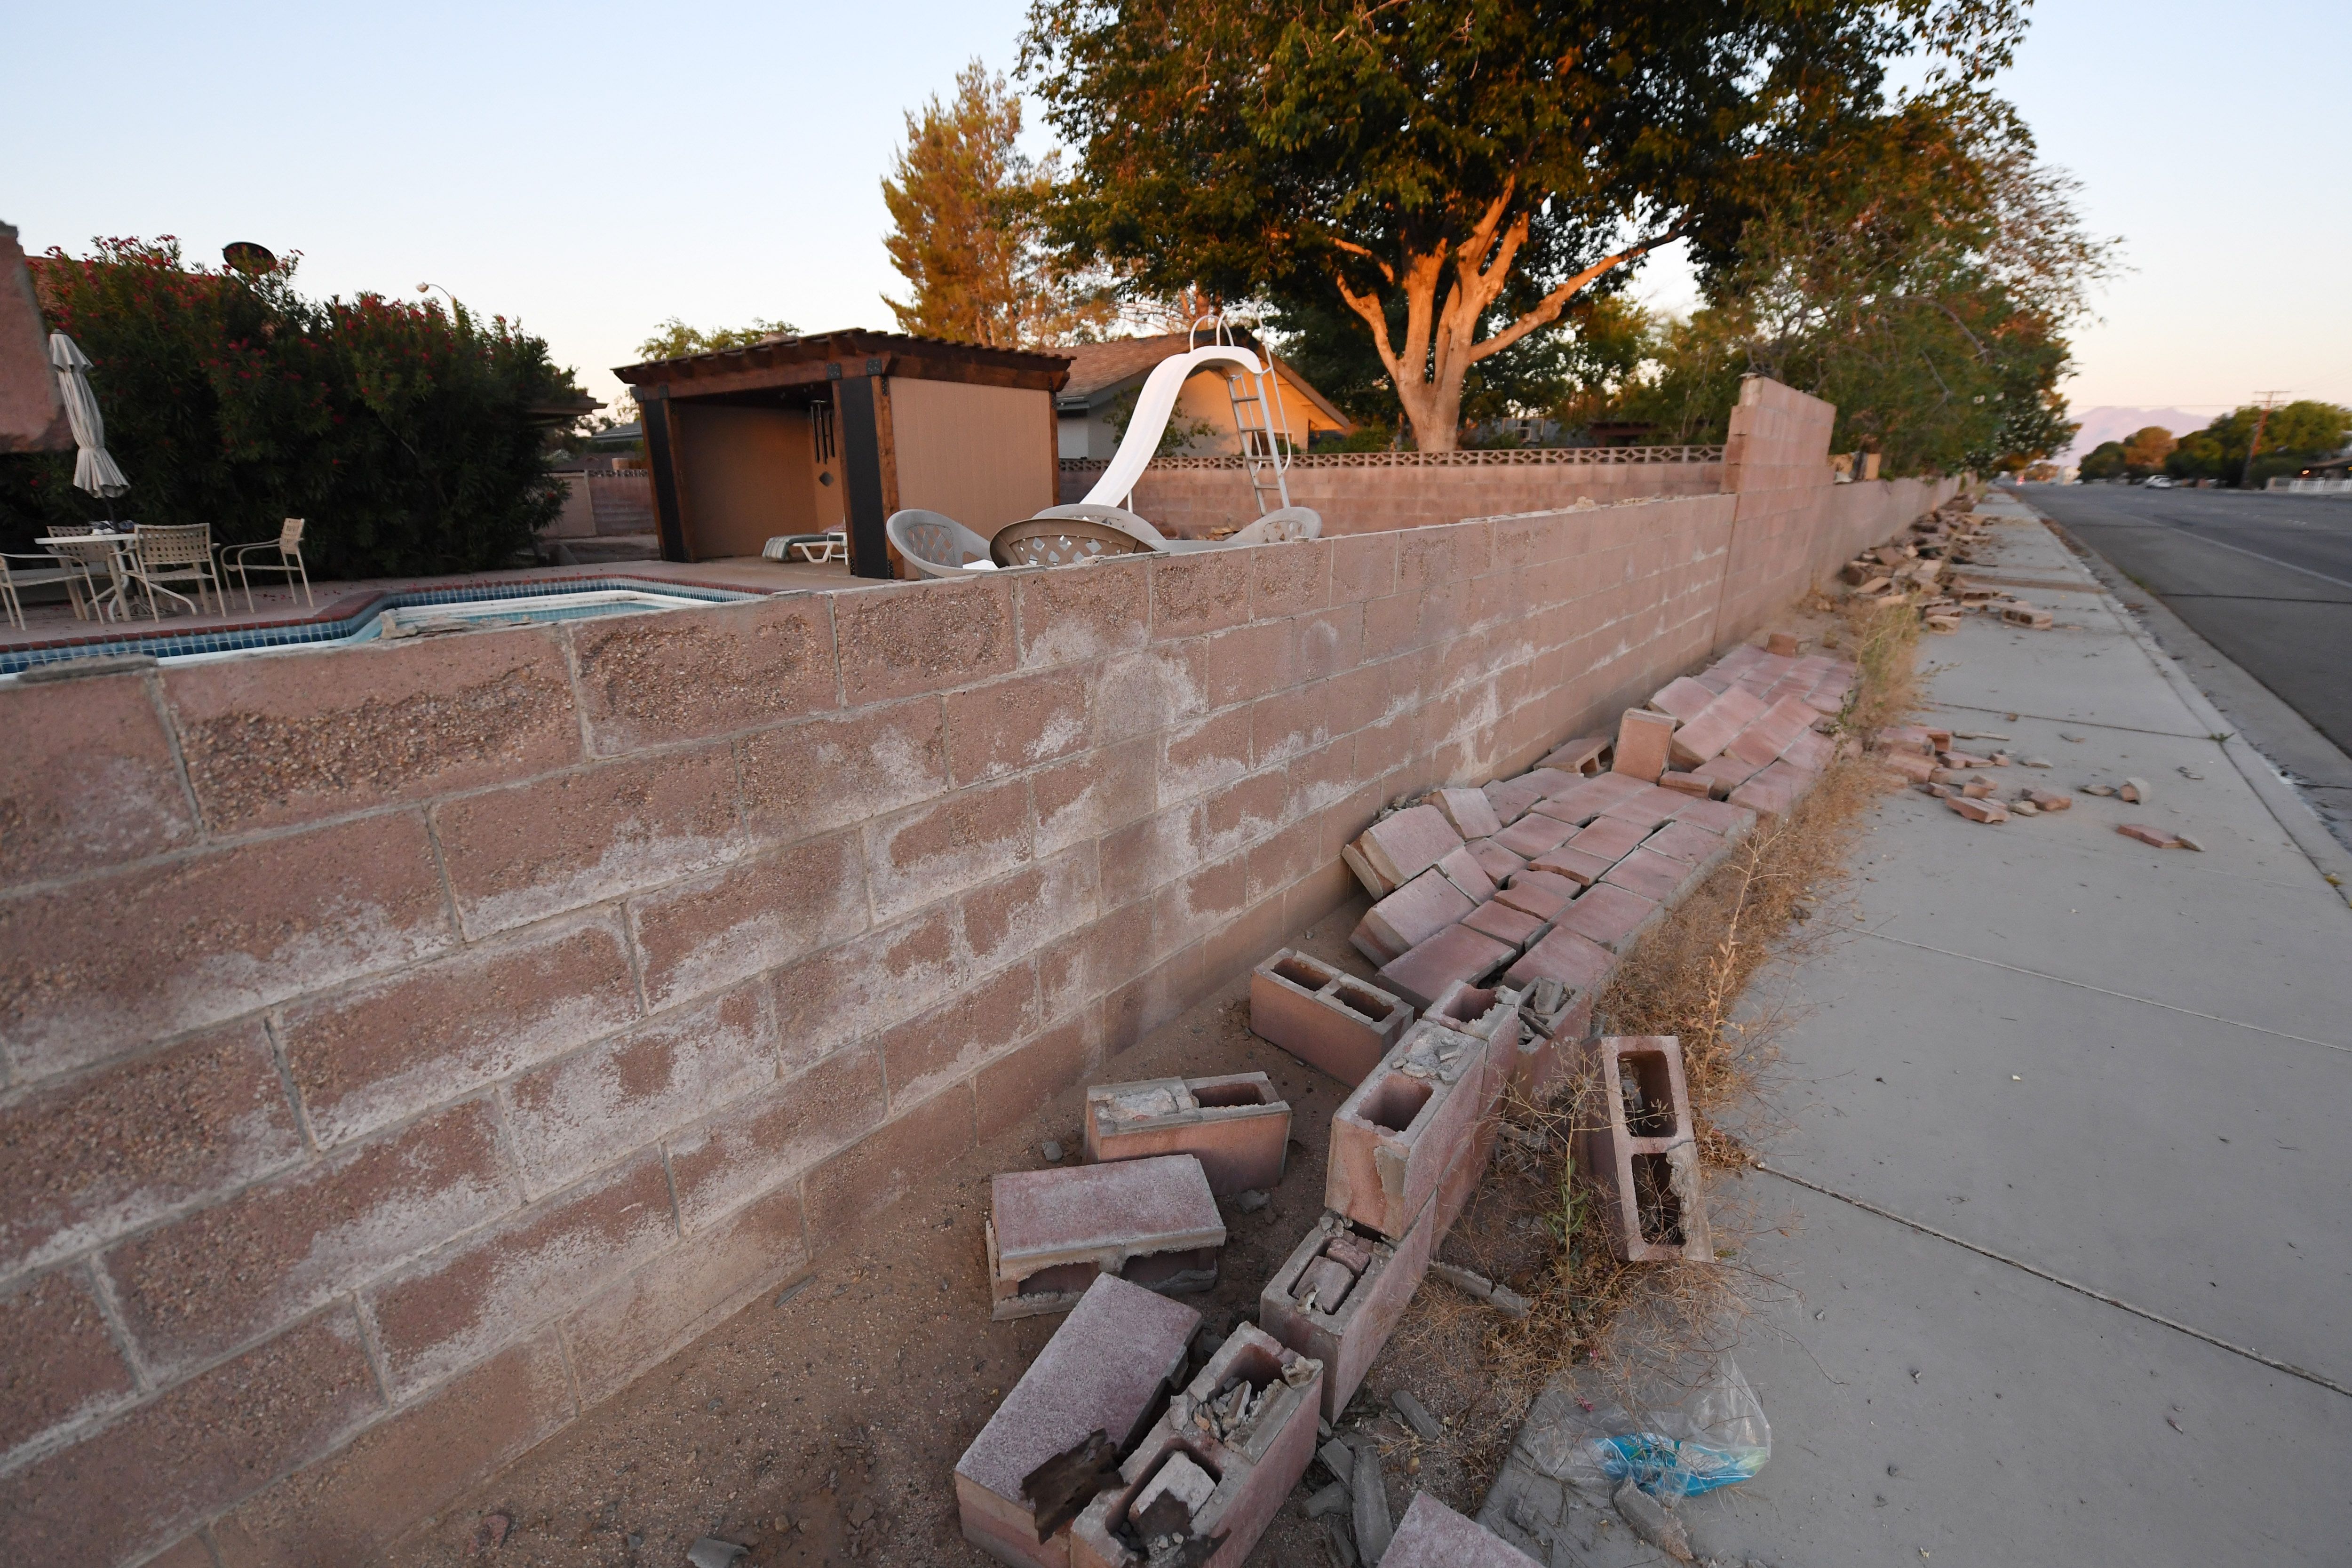 A cinderblock wall partially destroyed in Ridgecrest, California, on Saturda, following a magnitude 7.1 earthquake on Friday